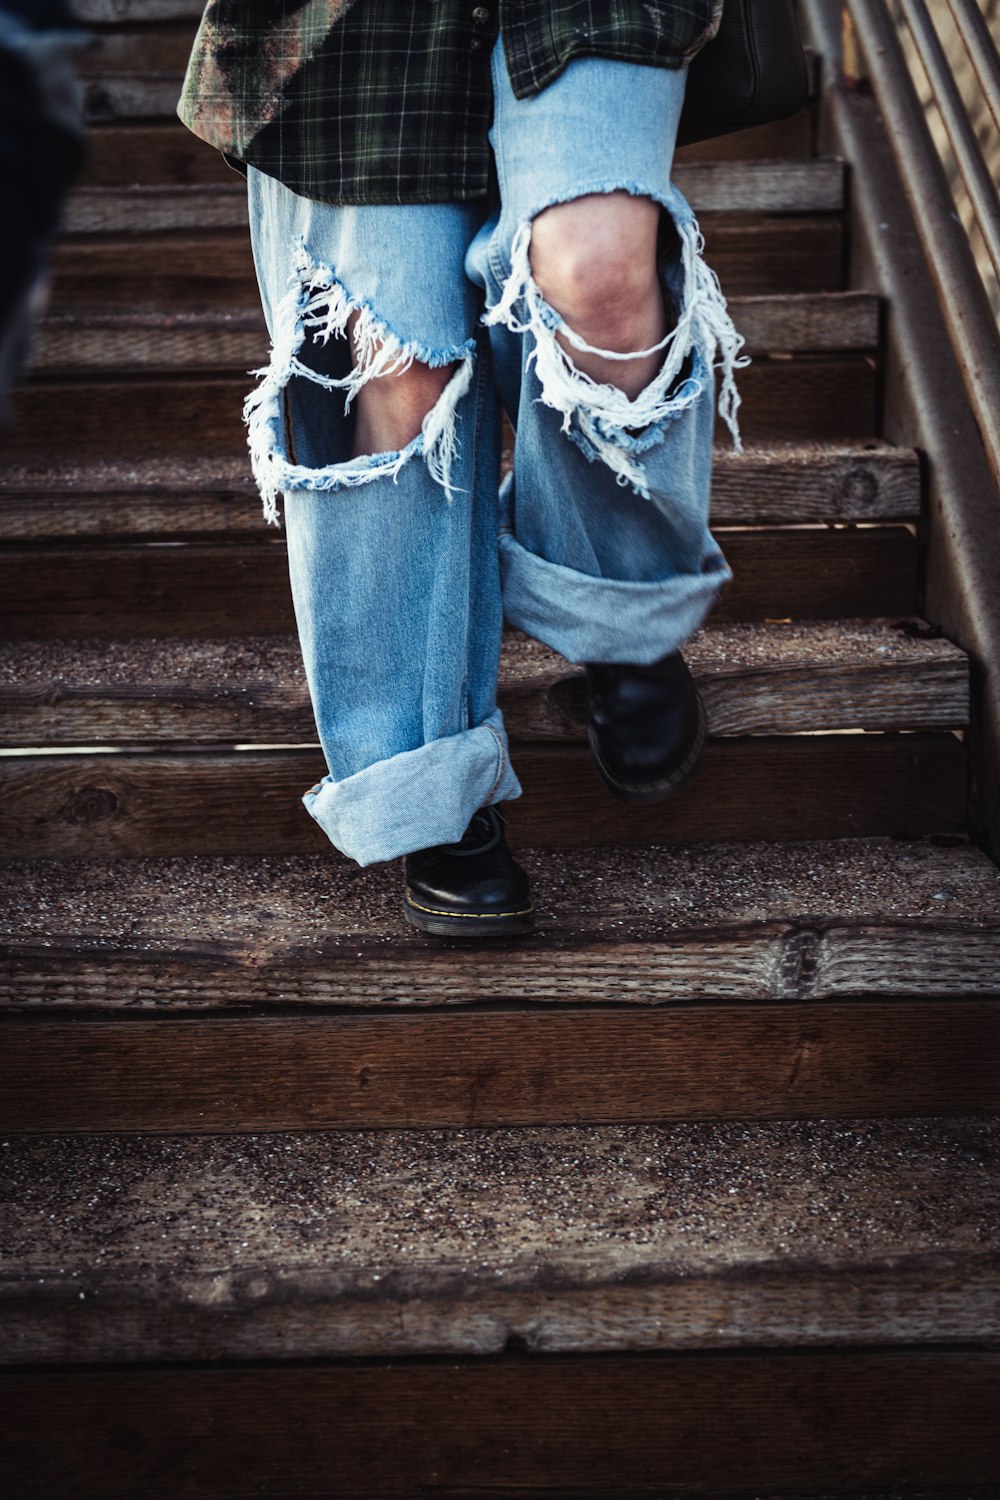 a person's legs in jeans and a blue shirt on a wooden staircase